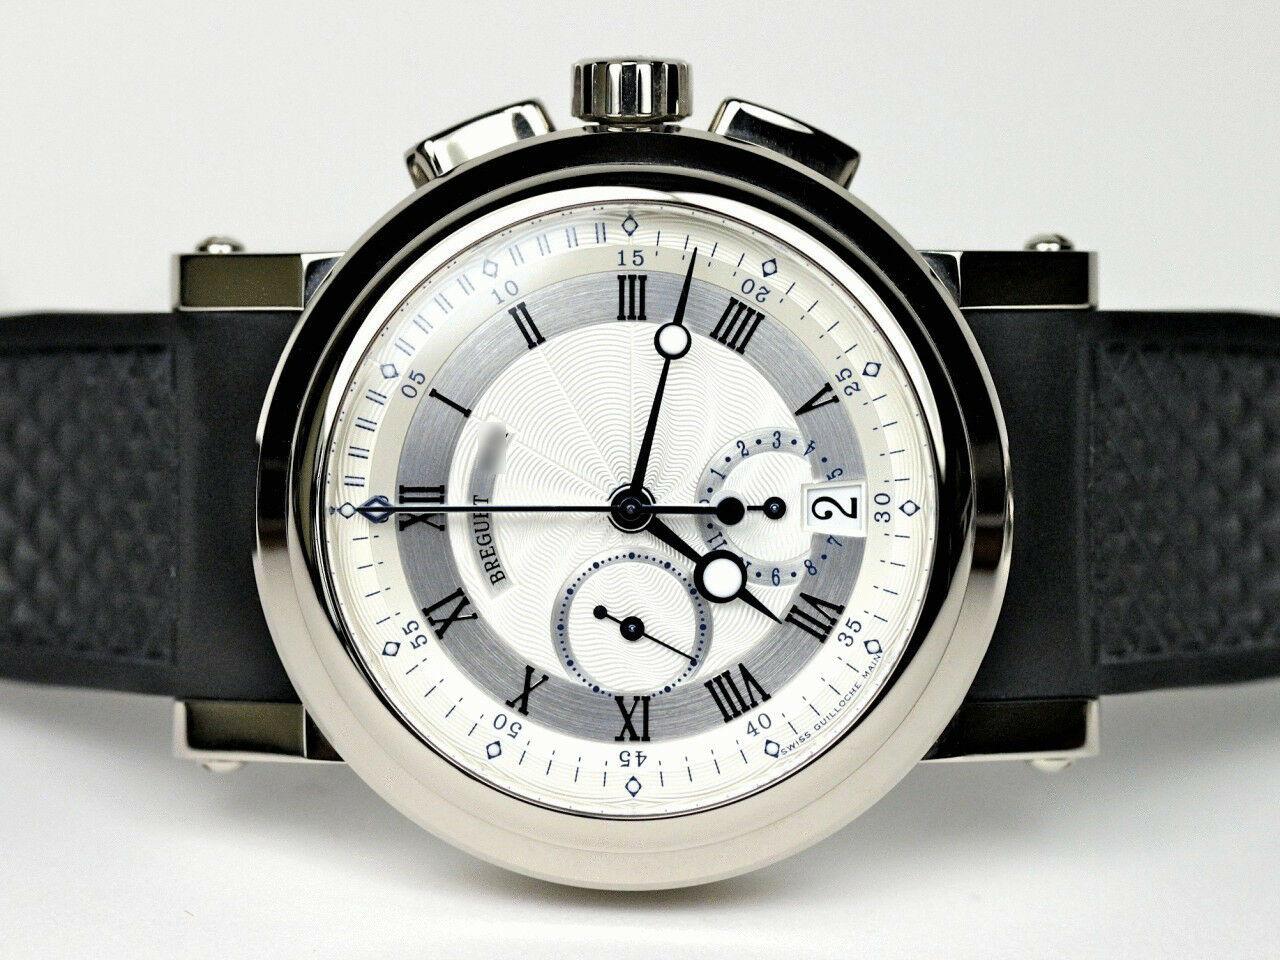 BREGUET MARINE CHRONOGRAPH 18KT WHITE GOLD 5827BB/12/5ZU

-Condition: Mint
-Movement: Automatic Self Winding
-Power Reserve: 48 hours
-Case: 18kt White Gold 
-Case size: 42 mm 
-Case Thickness: 14.10 mm
-Crystal: Scratch Resistant Sapphire 
-Hands: